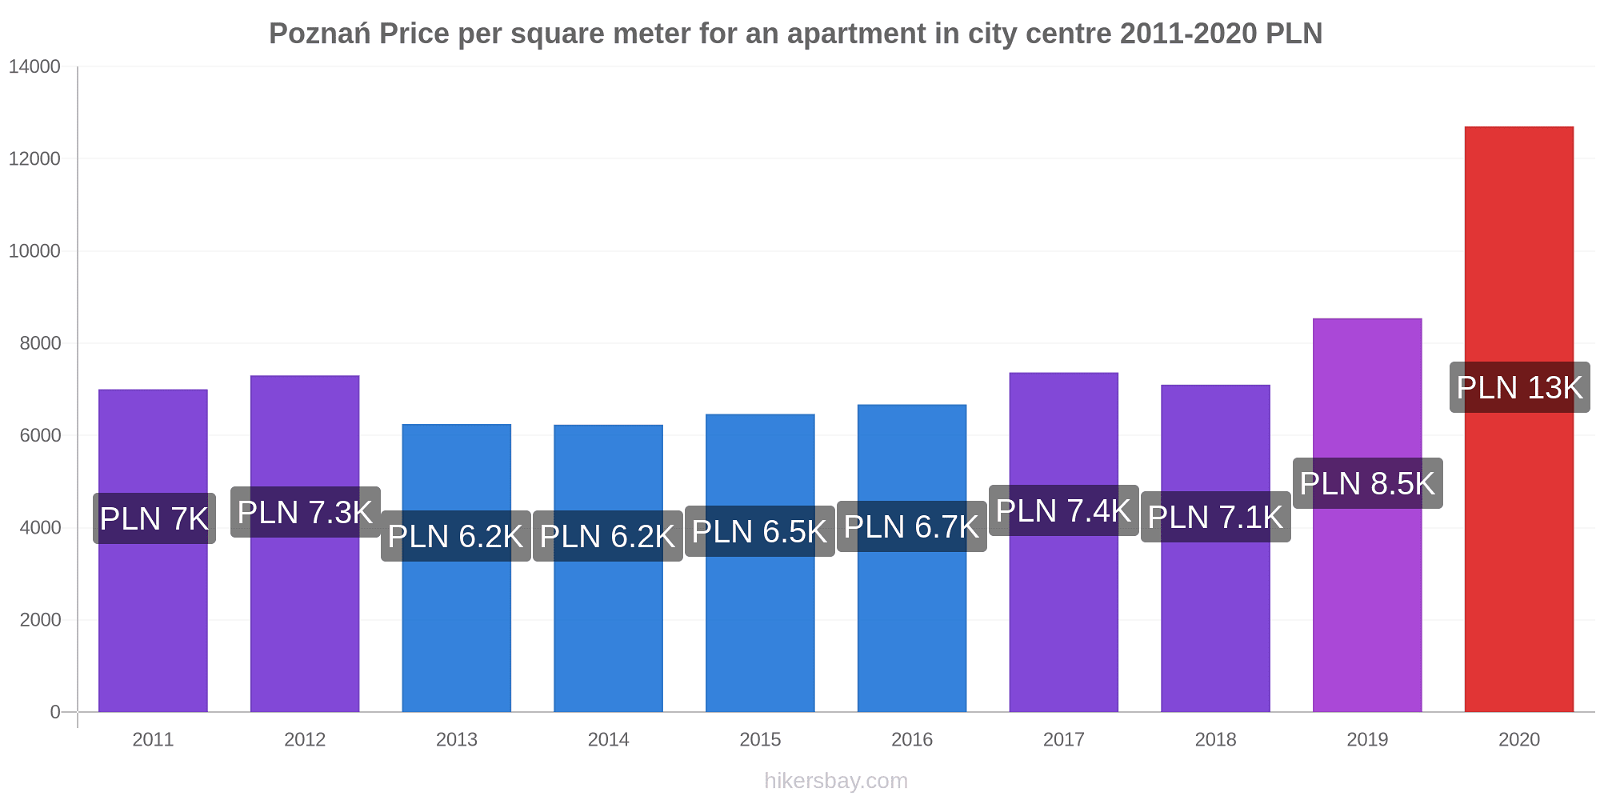 Poznań price changes Price per square meter for an apartment in city centre hikersbay.com